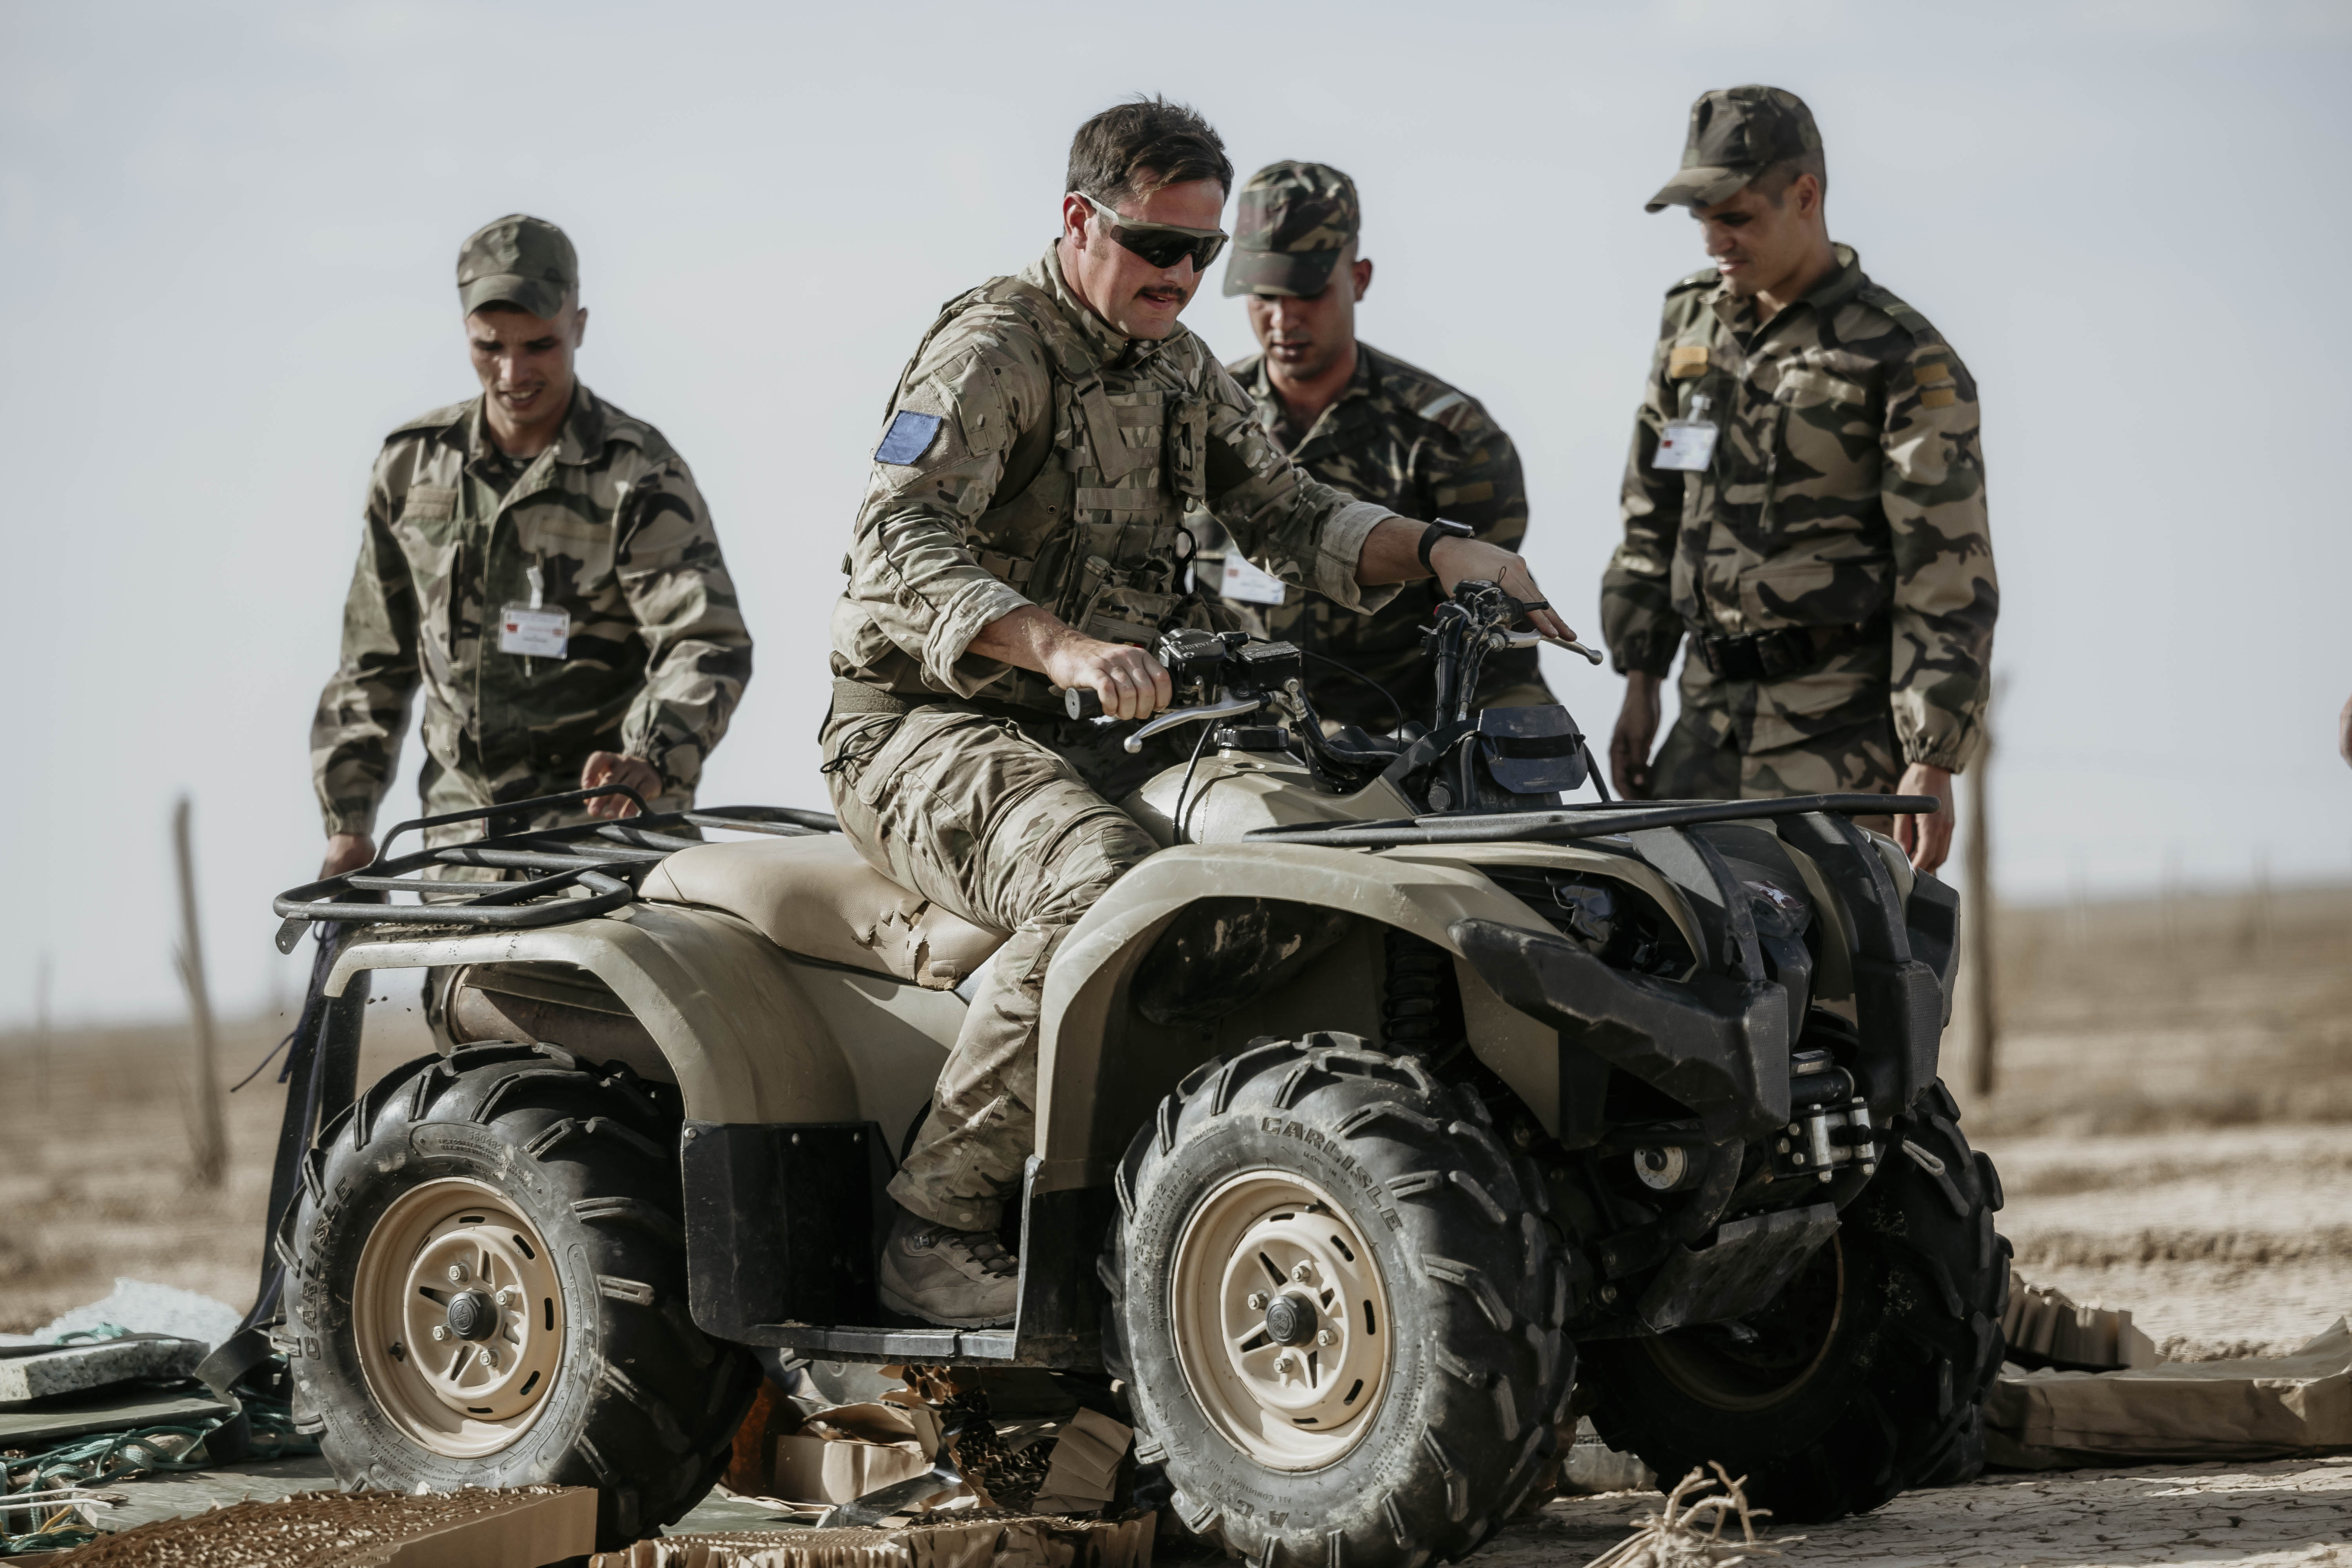 Image shows RAF aviators with a jeep vehicle.